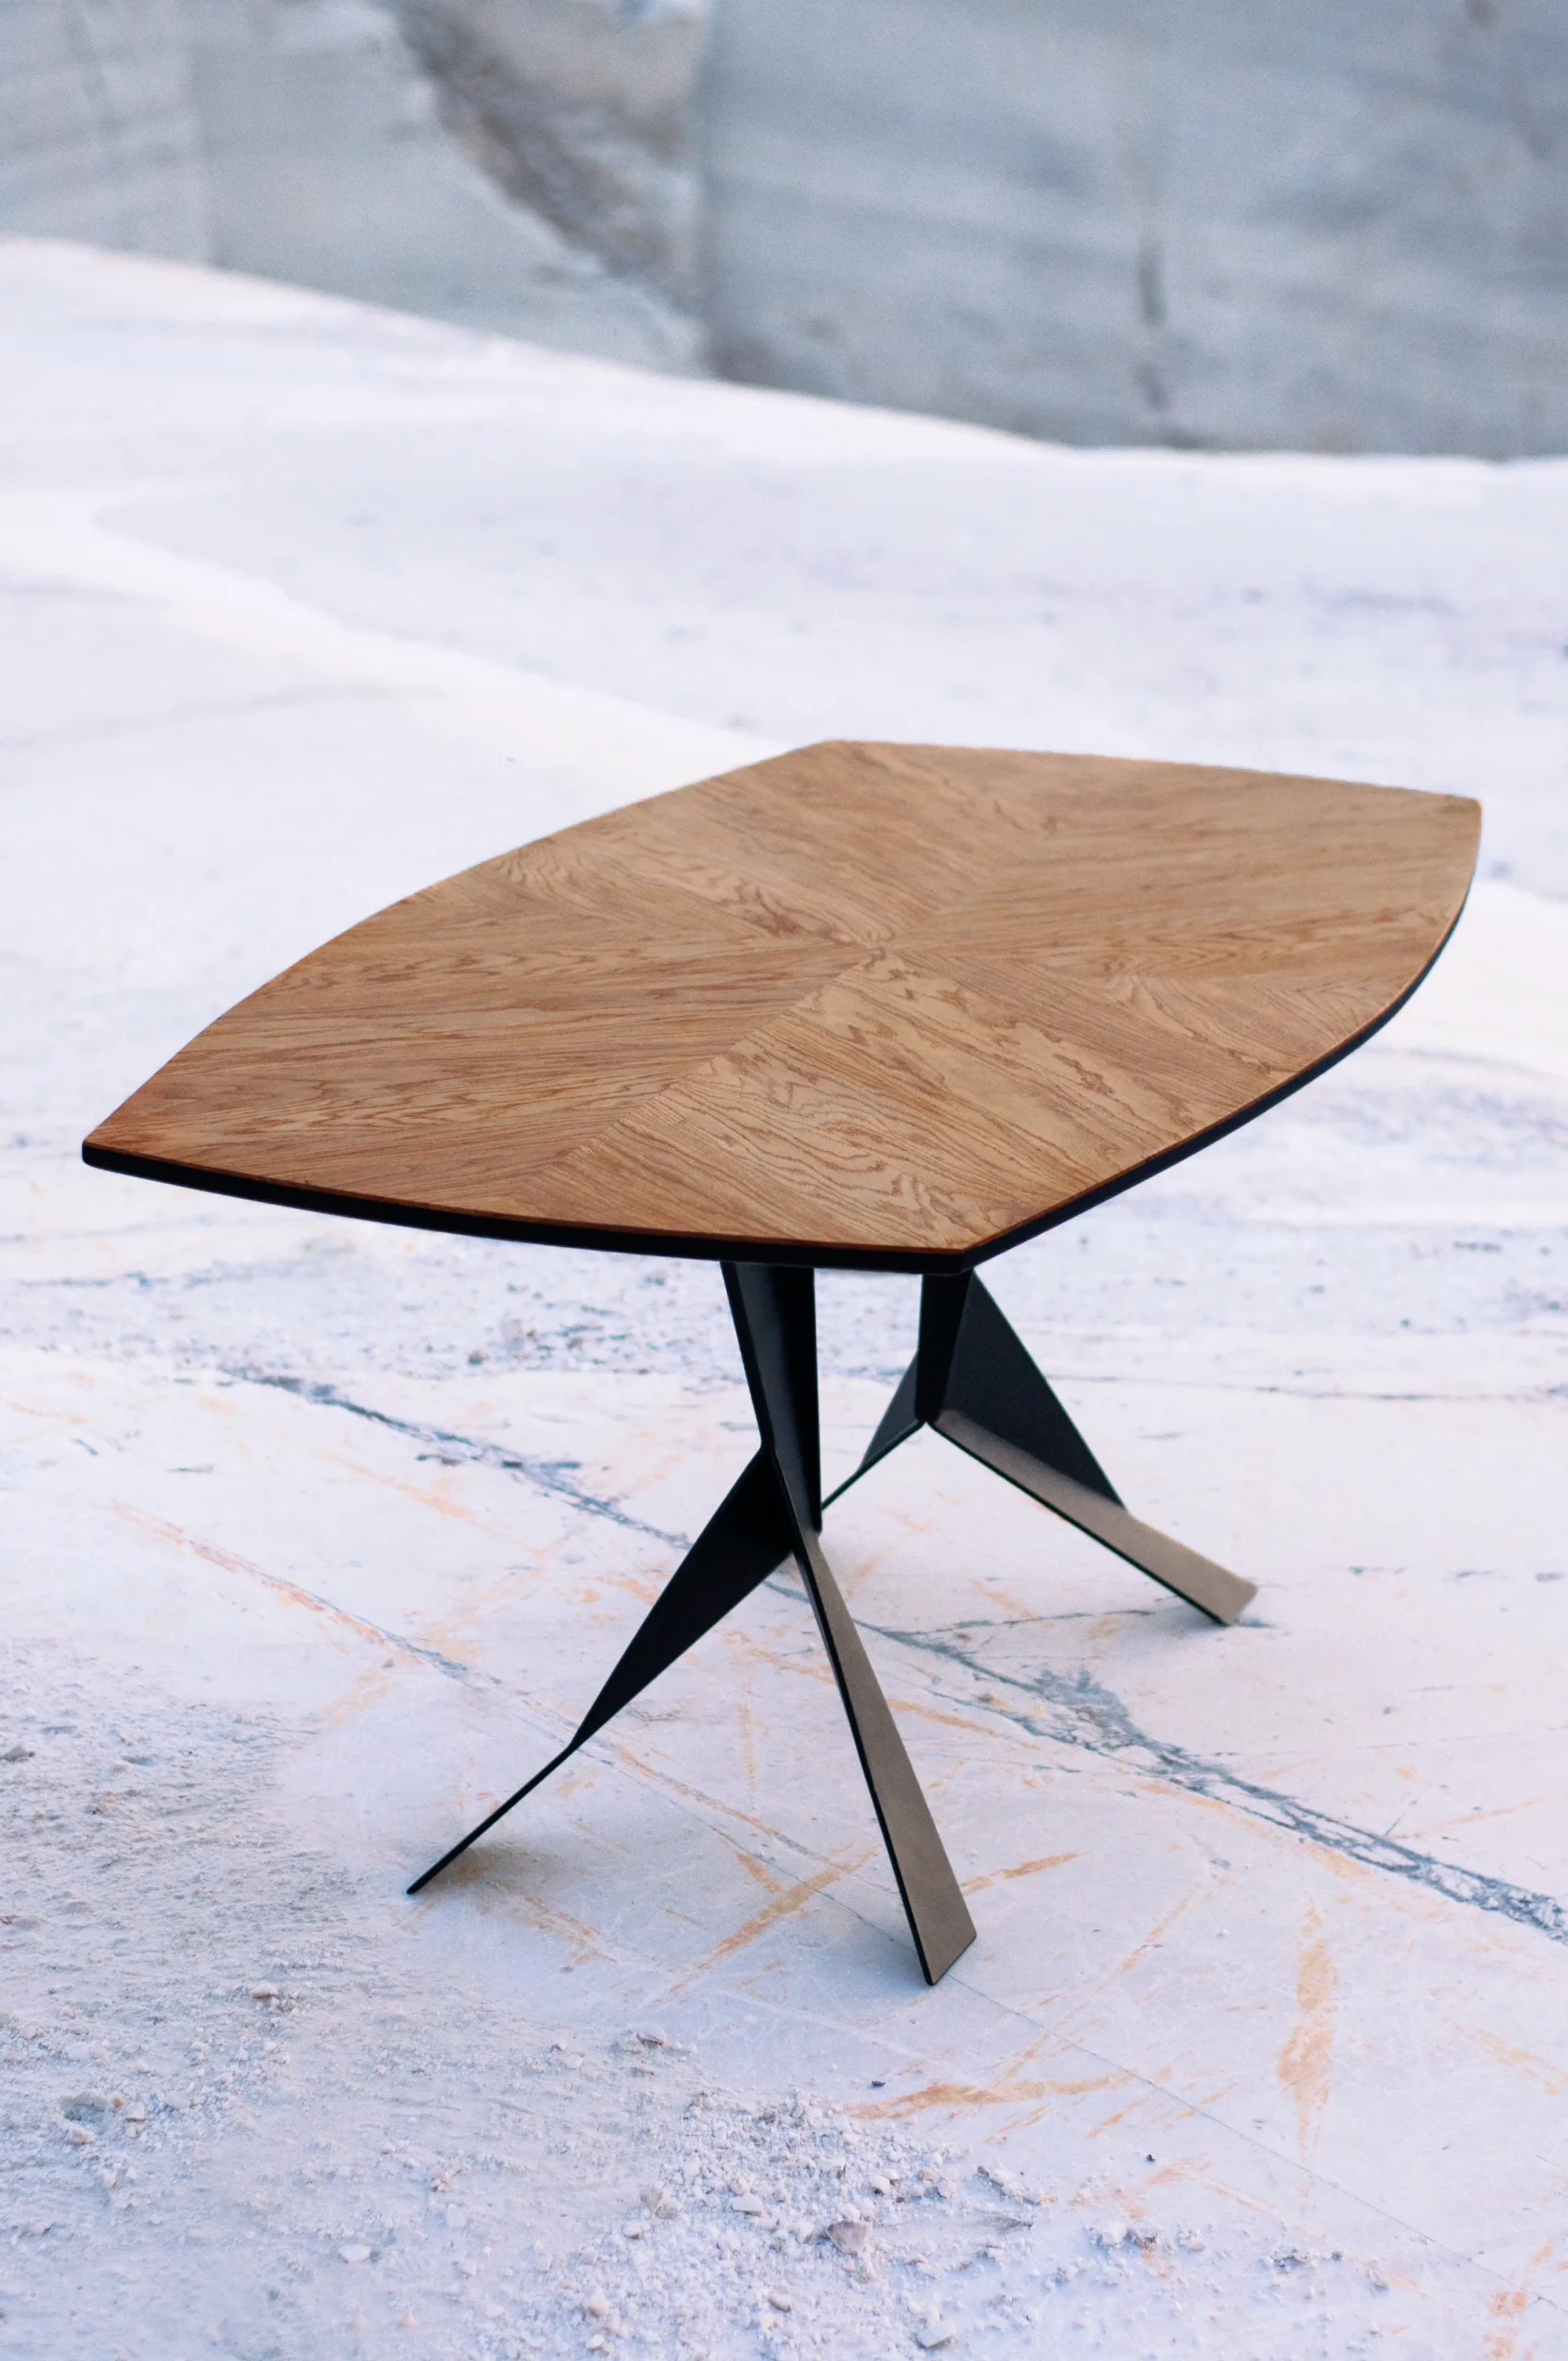 The Parabola dining table is a wooden table with handmade steel legs.